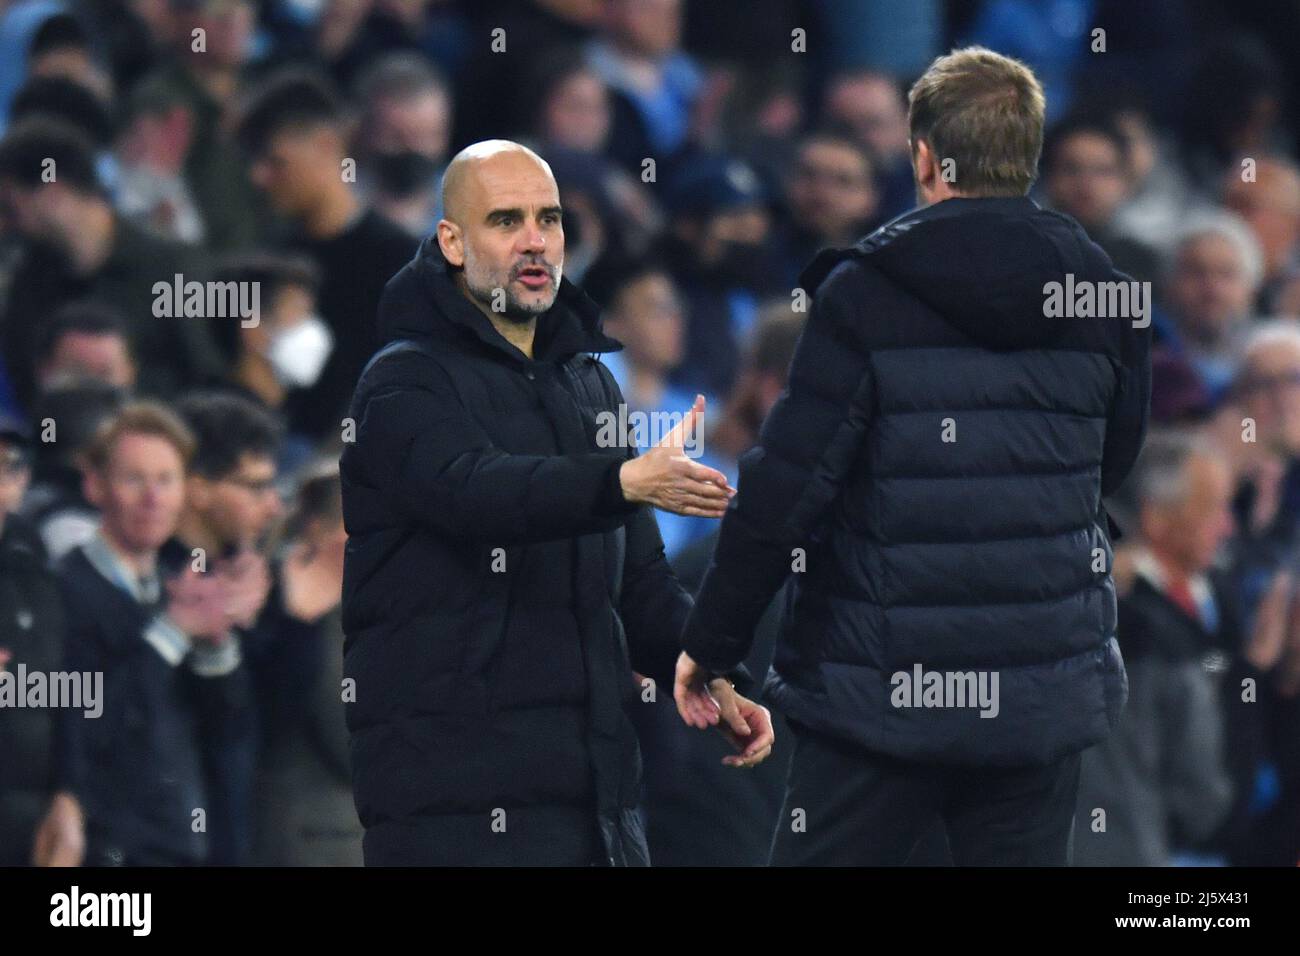 Manchester City manager Pep Guardiola shakes hands with Brighton and Hove Albion manager Graham Potter. Picture date: Thursday April 21, 2022. Photo credit should read:   Anthony Devlin/Alamy Live News/Alamy Live News Stock Photo